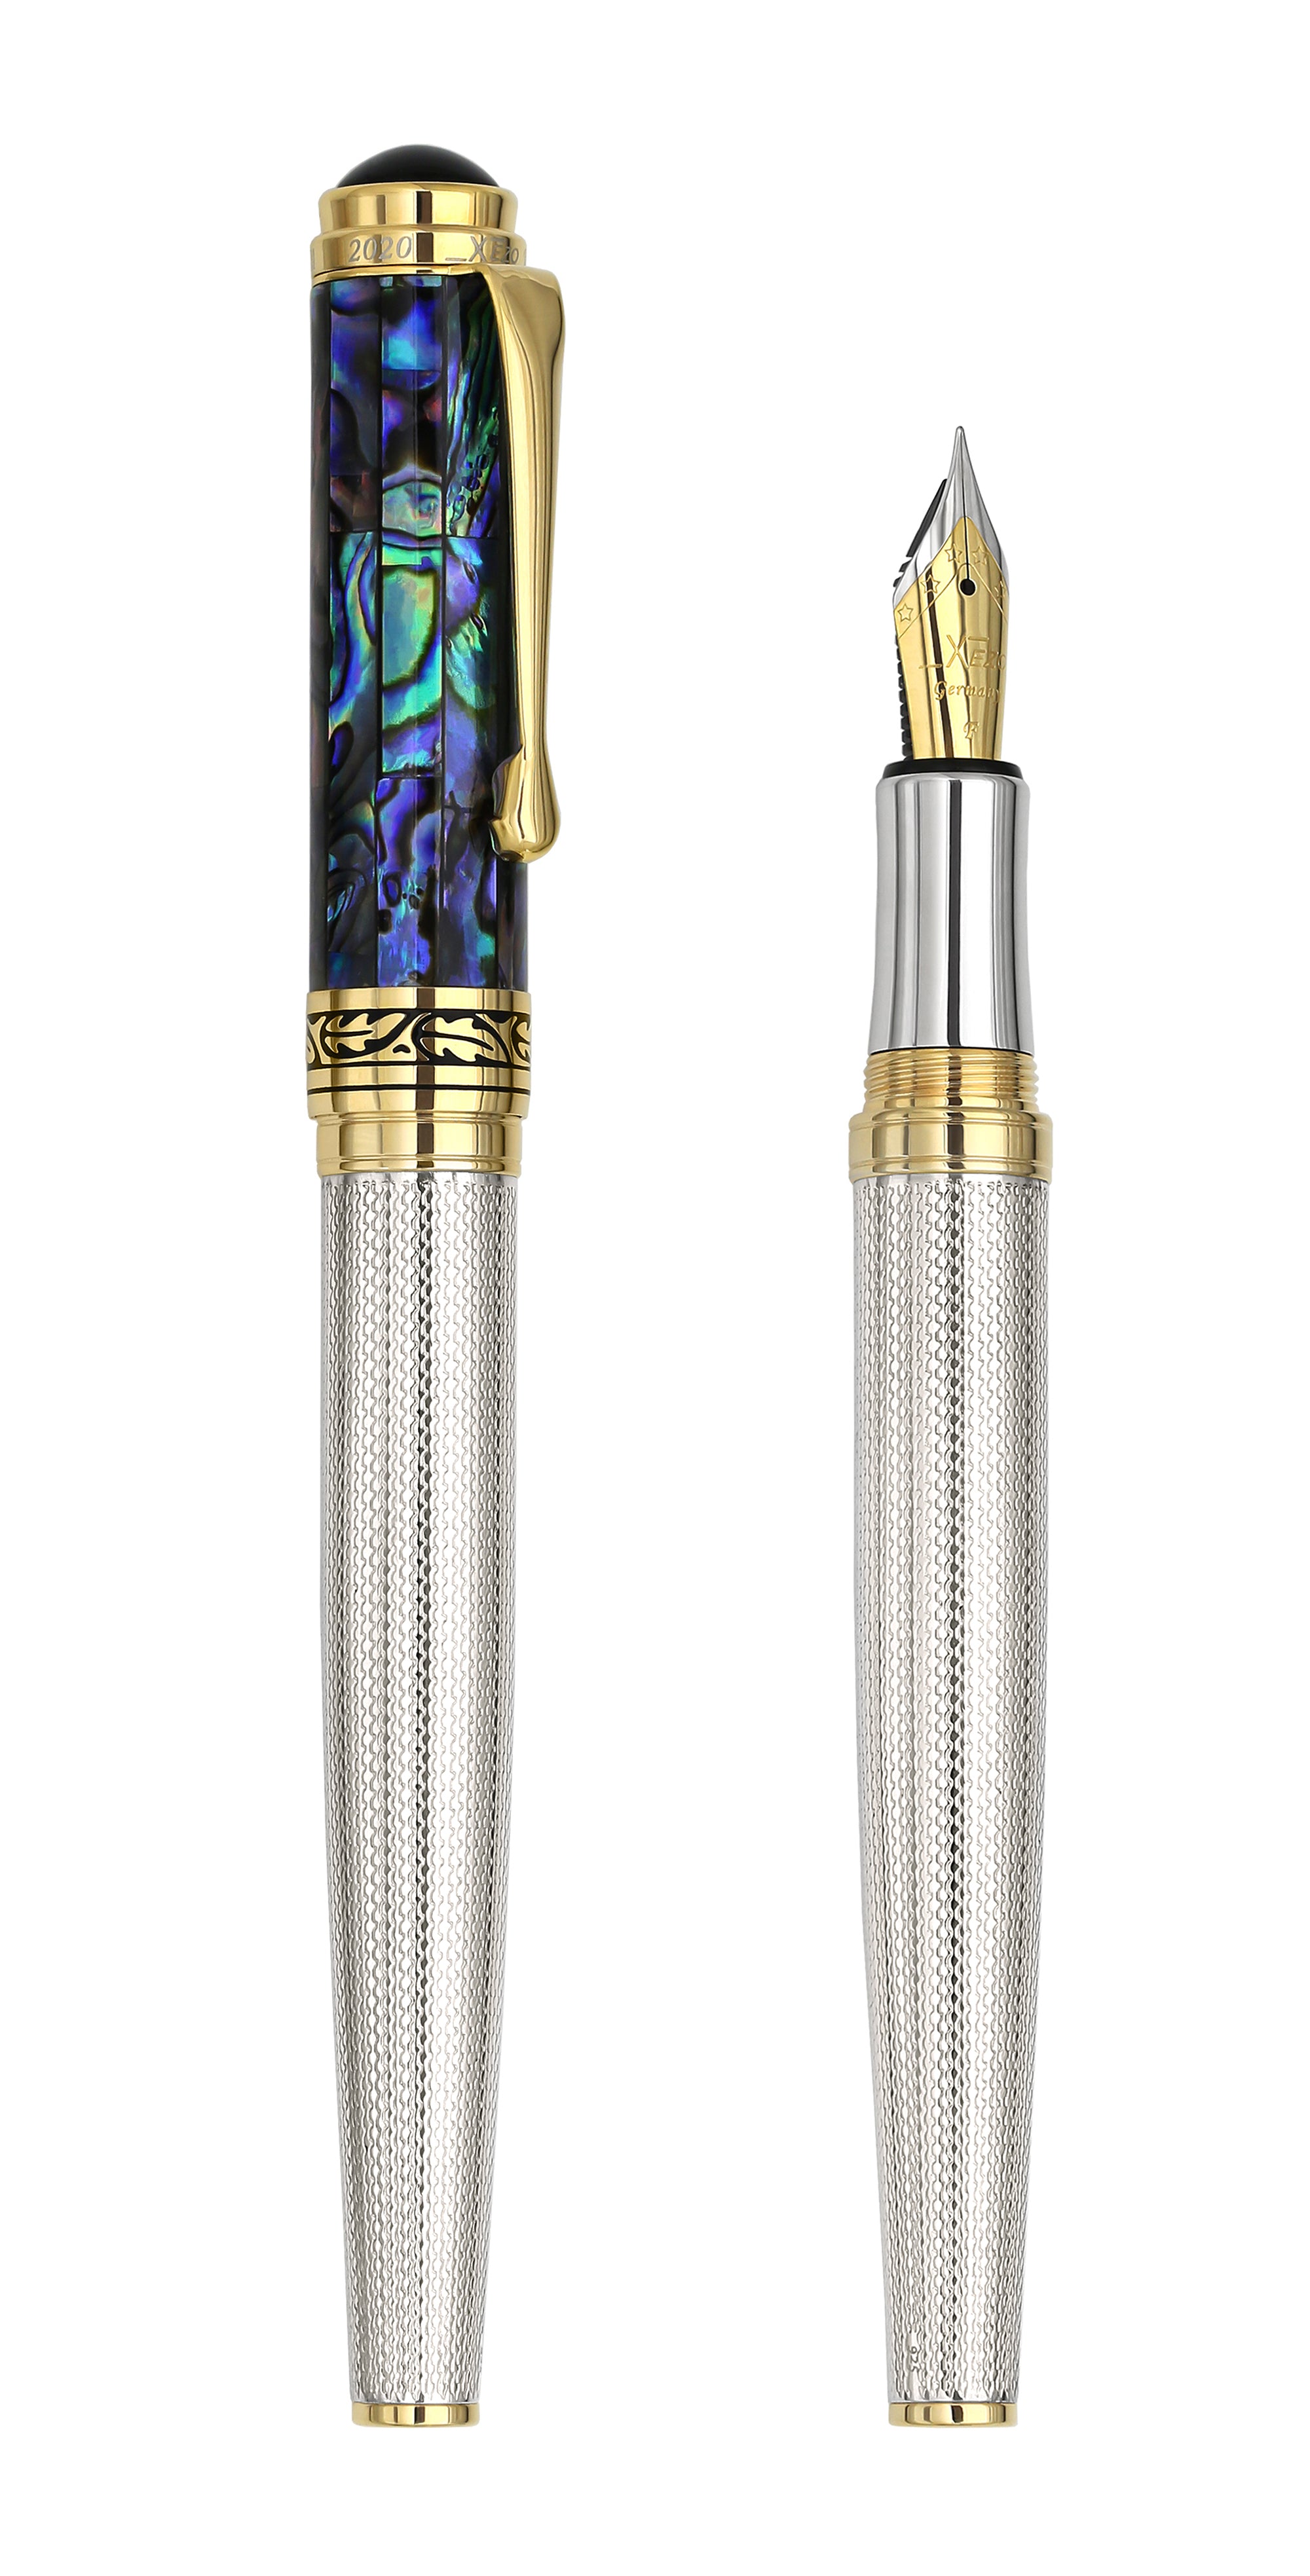 Xezo Maestro Twist Action Ballpoint Pen, Medium point. Oceanic White Mother of Pearl with 925 Sterling Silver and 18 Karat Gold plating. Handcrafted